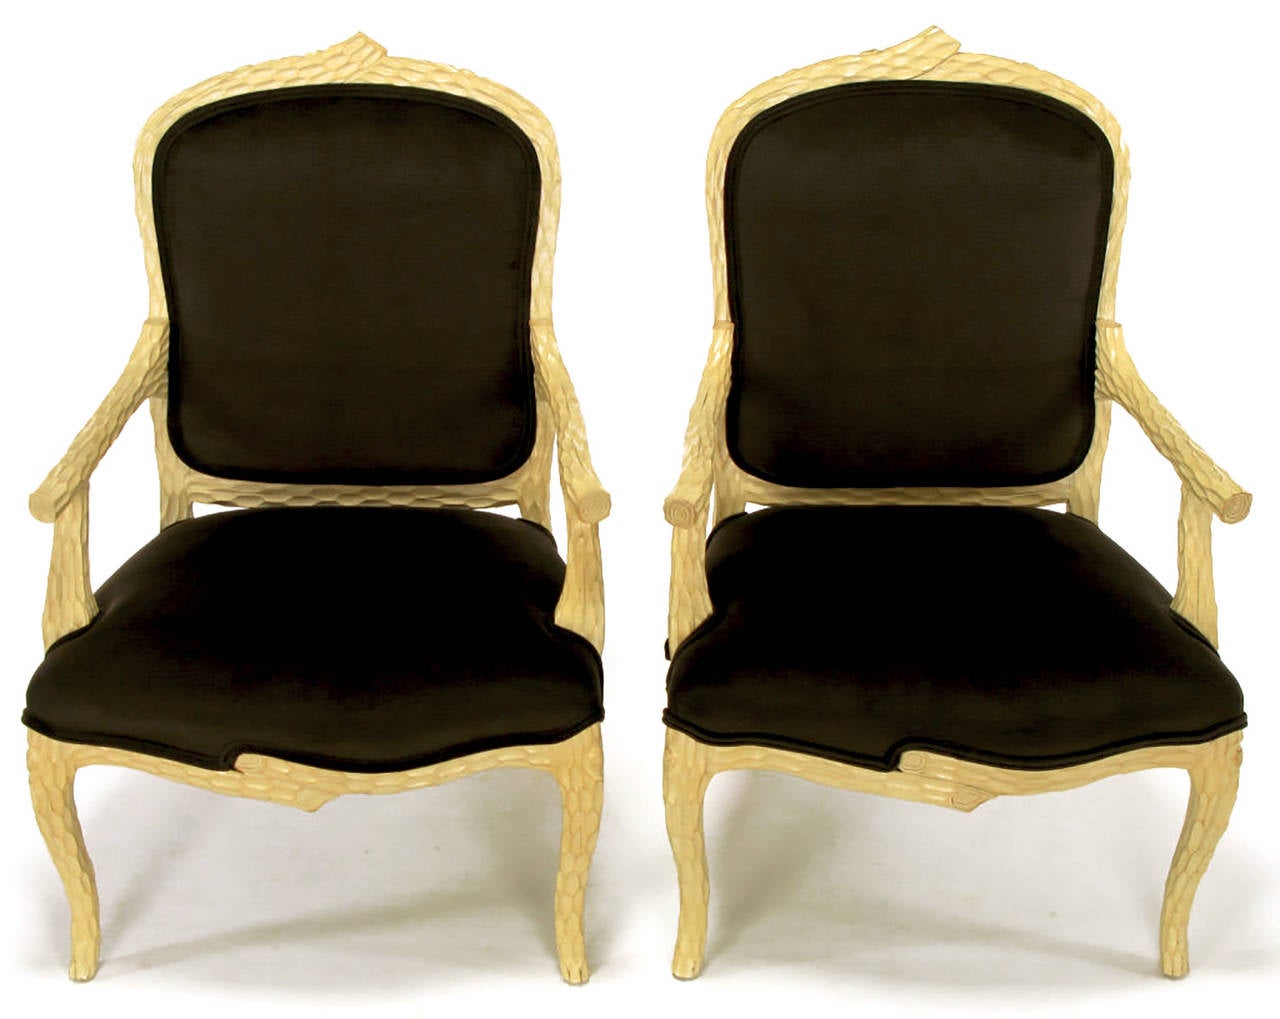 Pair of Louis XV inspired faux bois armchairs upholstered in new dark chocolate suede-like velvet. Hand-carved wood frames are finished in an ivory glaze. Cabriole front and back legs.